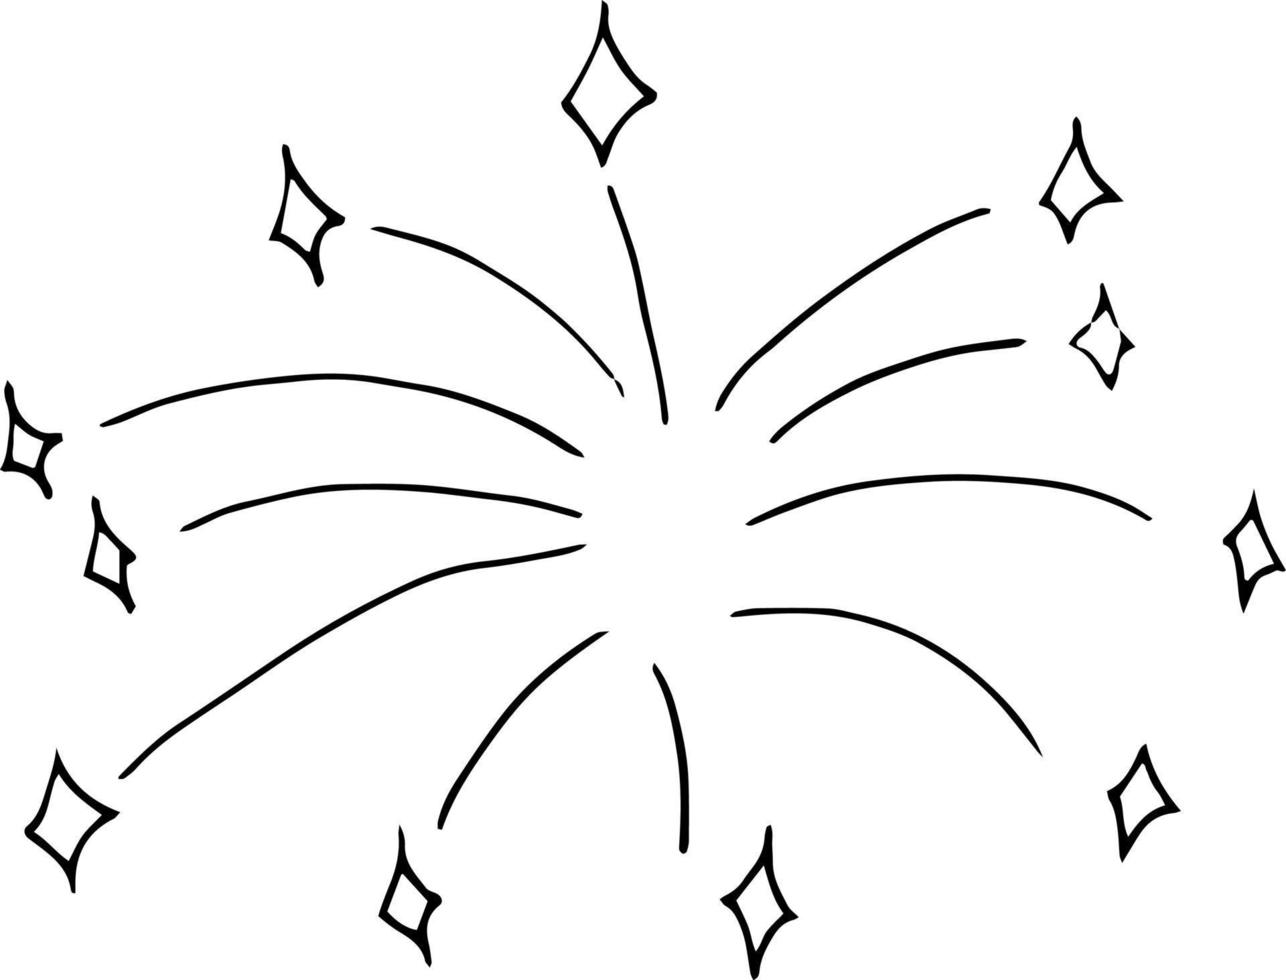 fireworks hand drawn doodle. vector, minimalism, monochrome. icon, sticker. celebration new year independence day birthday vector